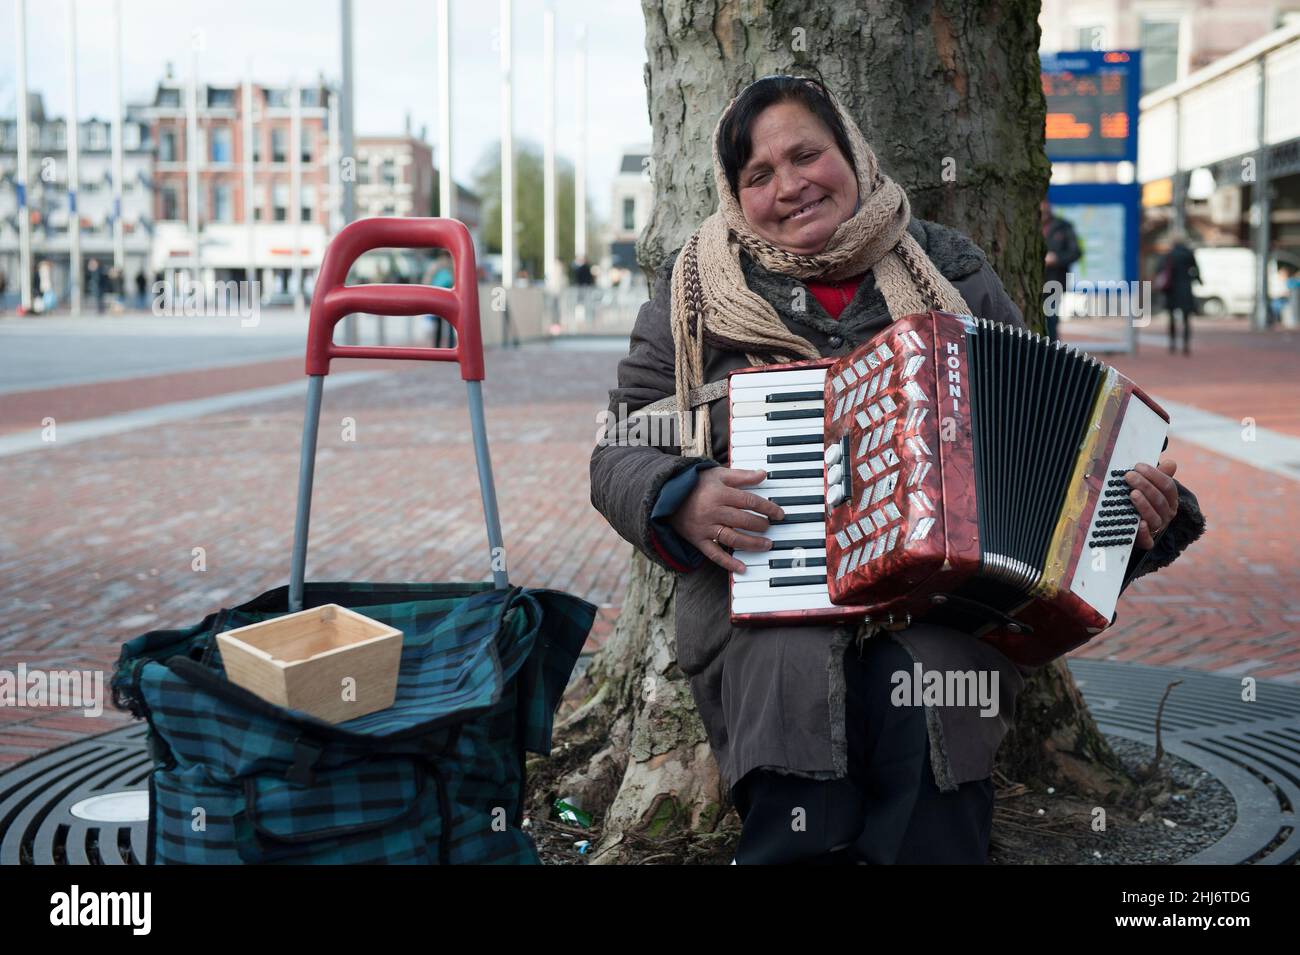 Haarlem, Netherlands. Roma woman playing her accordion at a railway station square to earn a buck or two a day. Roma men and women are en masse transported to Western European Countries to earn tips and scraps of money in various ways to support their lives in poverty and the Huma Trafficking Groups that bring them to the West. Stock Photo